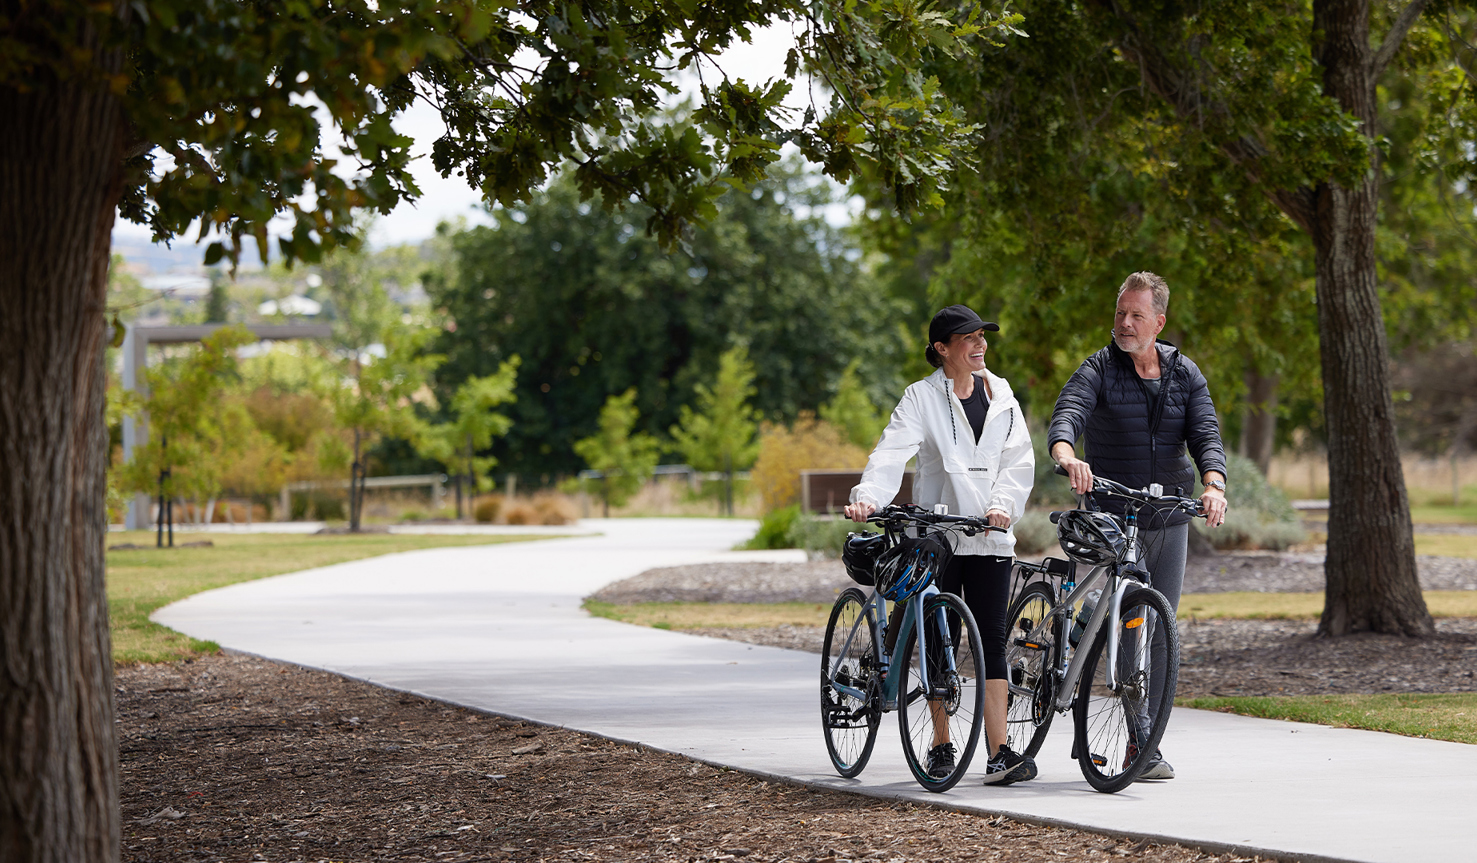 A man and woman walking next to their bikes along a path surrounded by trees.